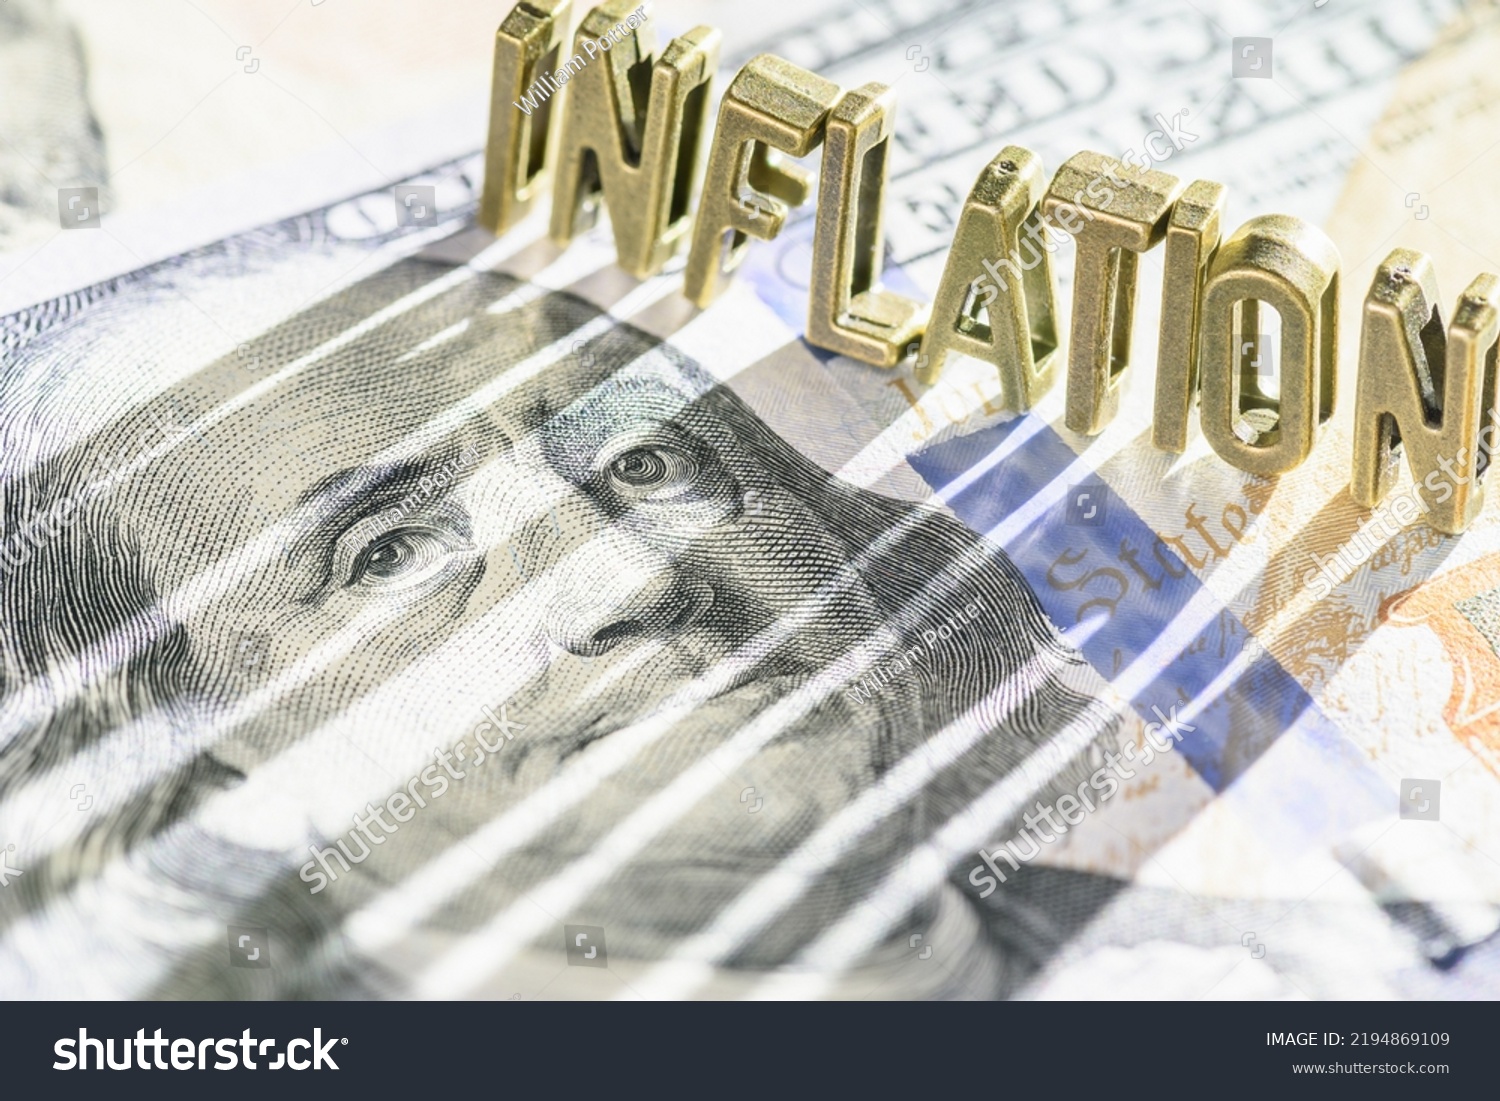 Inflation and consumer spending, financial concept : Word INFLATION on a US dollar note with a long shadow, depicting inflation that raise prices, lowering purchasing power, lowers currency valuation. #2194869109